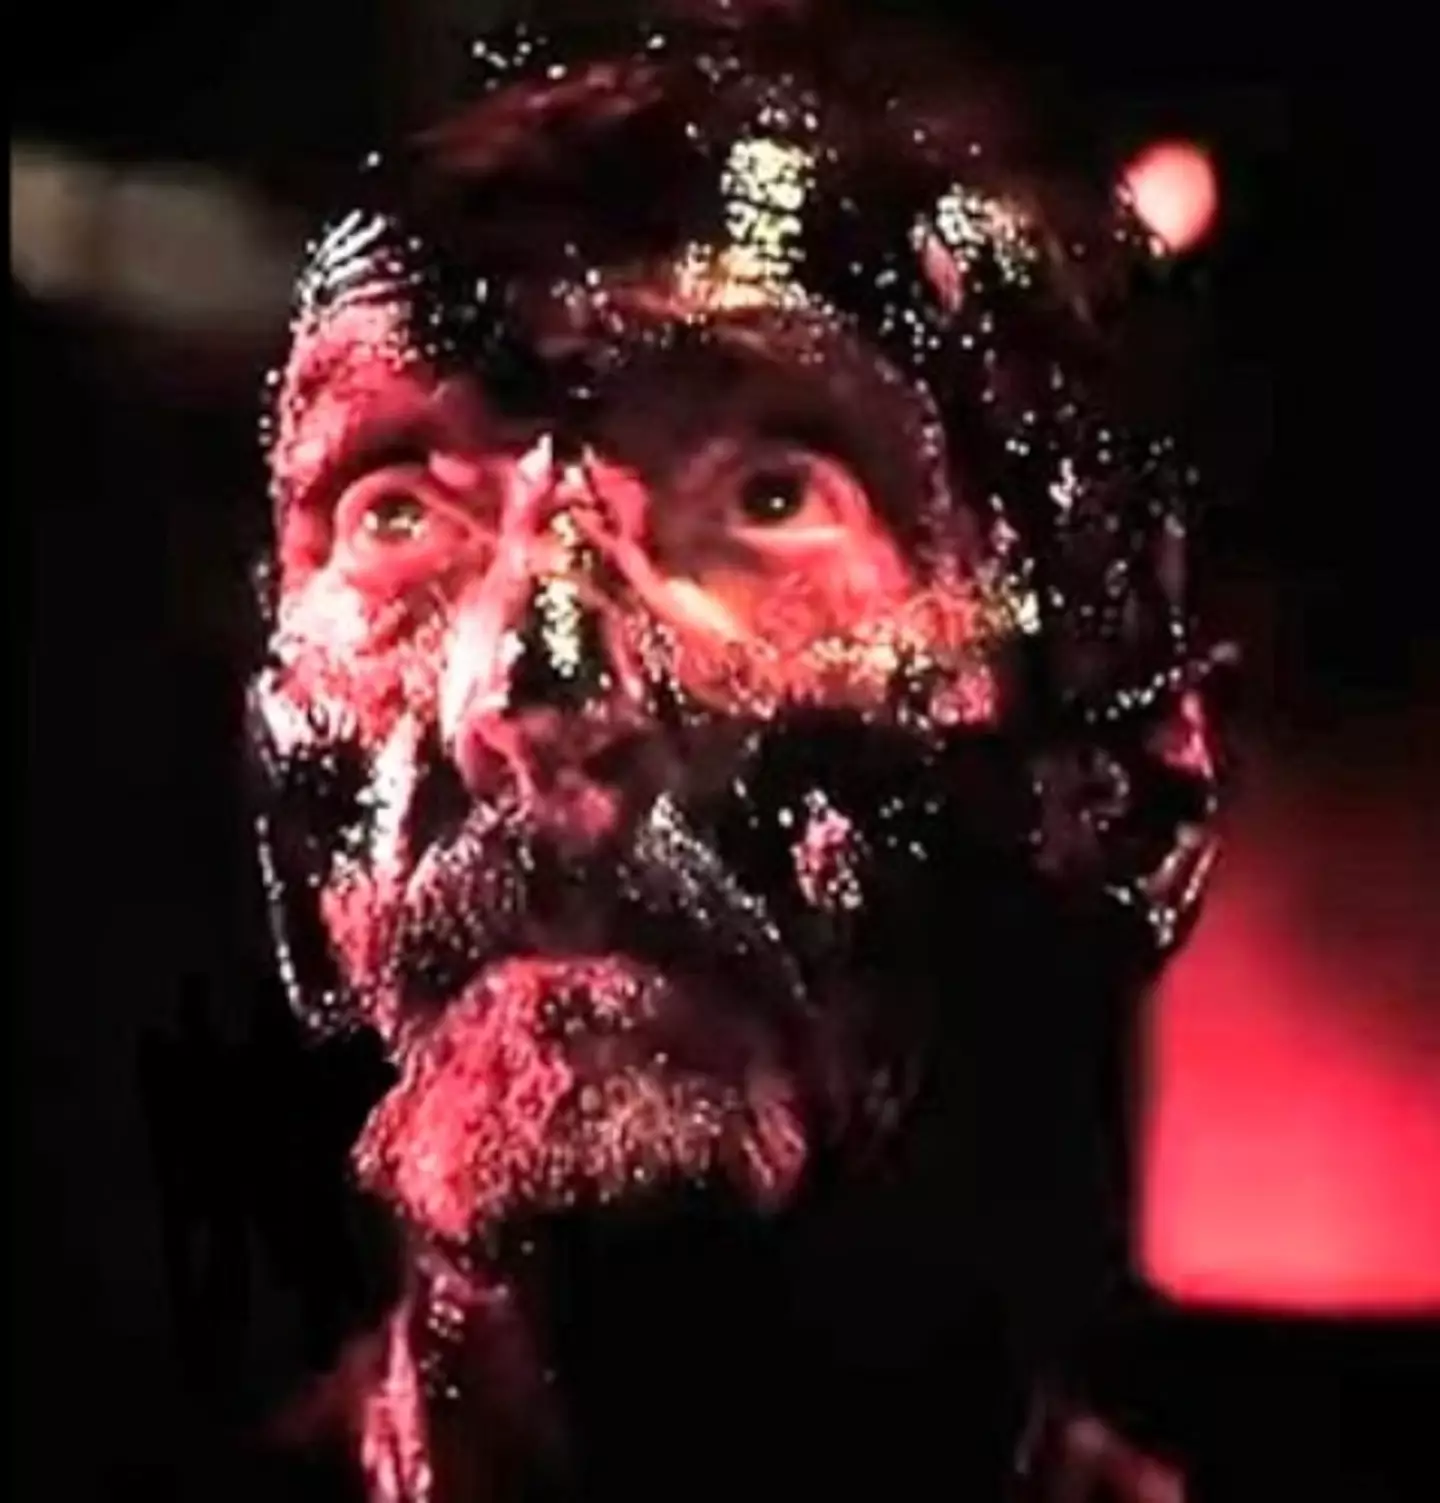 John Kramer, played by Tobin Bell, was stained crimson after the bloodboarding